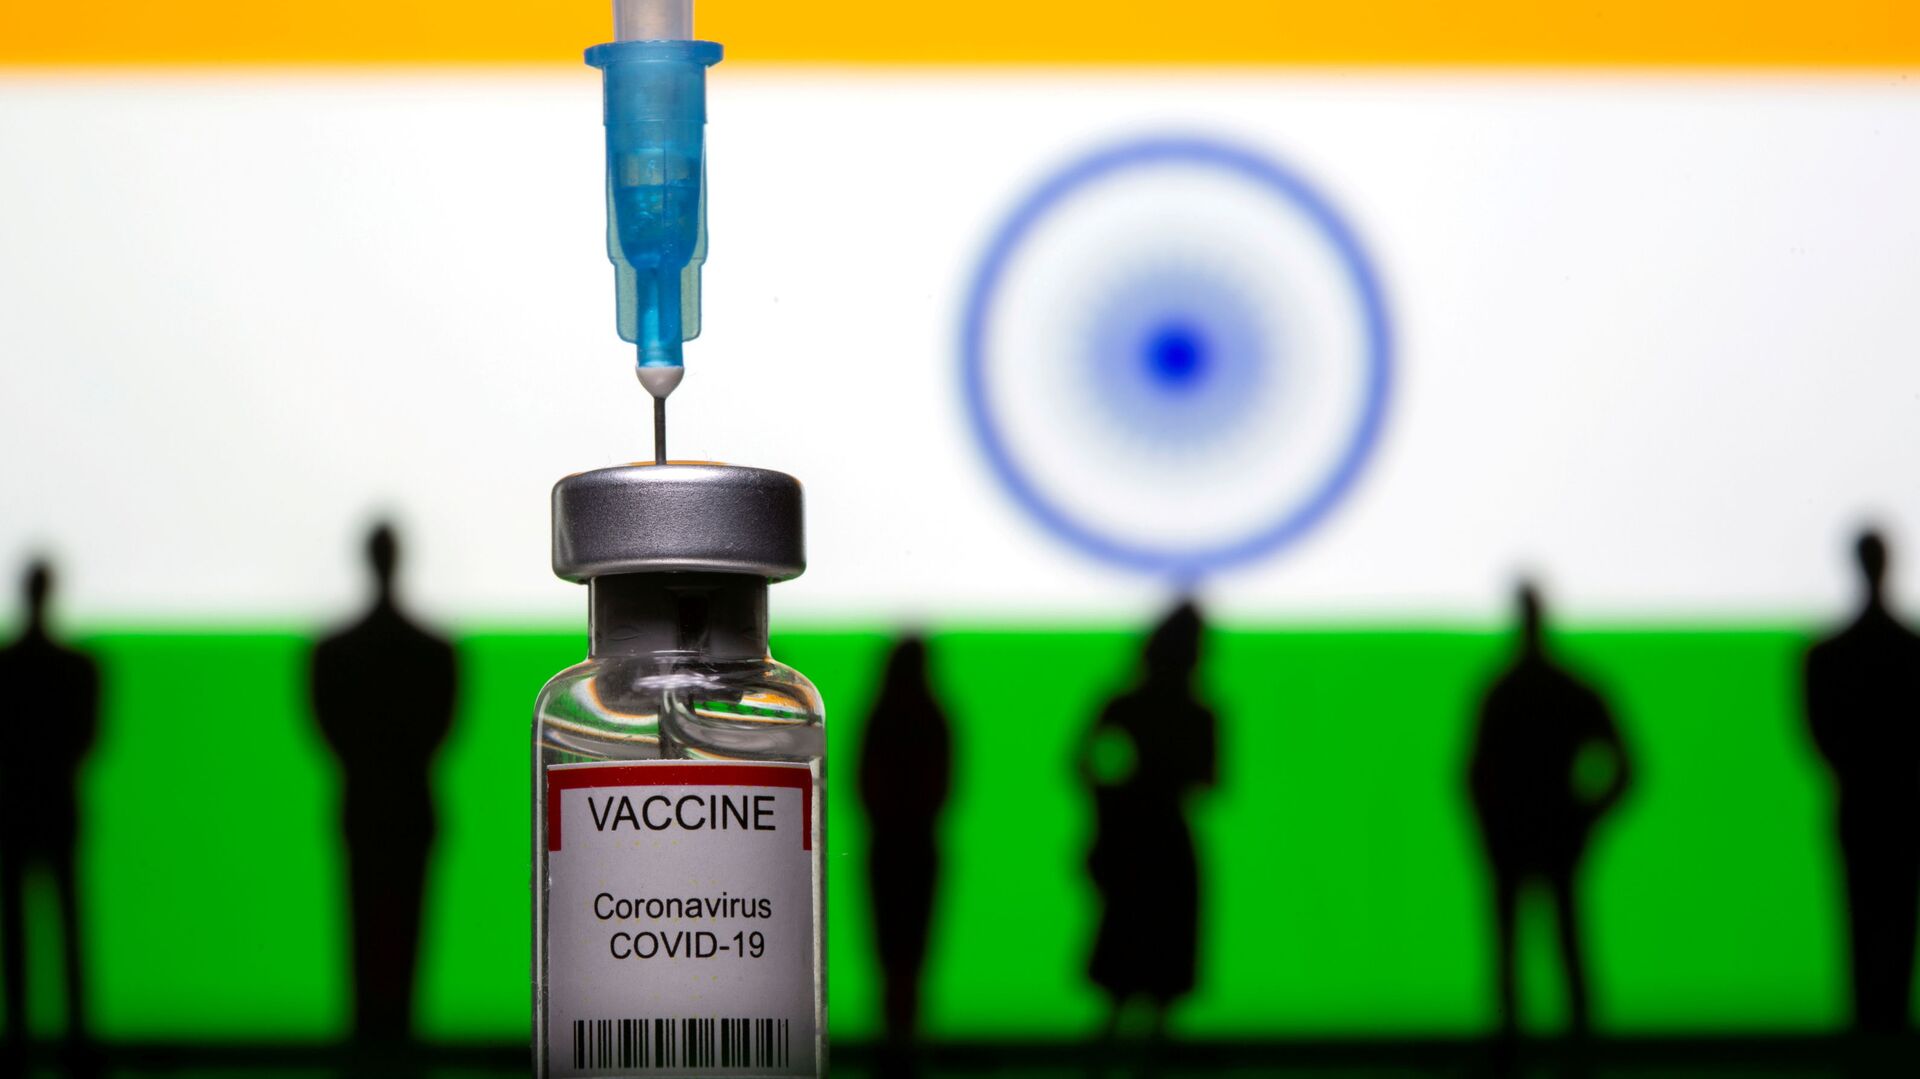 3D-printed small toy figurines, a syringe and vial labelled coronavirus disease (COVID-19) vaccine are seen in front of India flag - Sputnik International, 1920, 10.01.2022